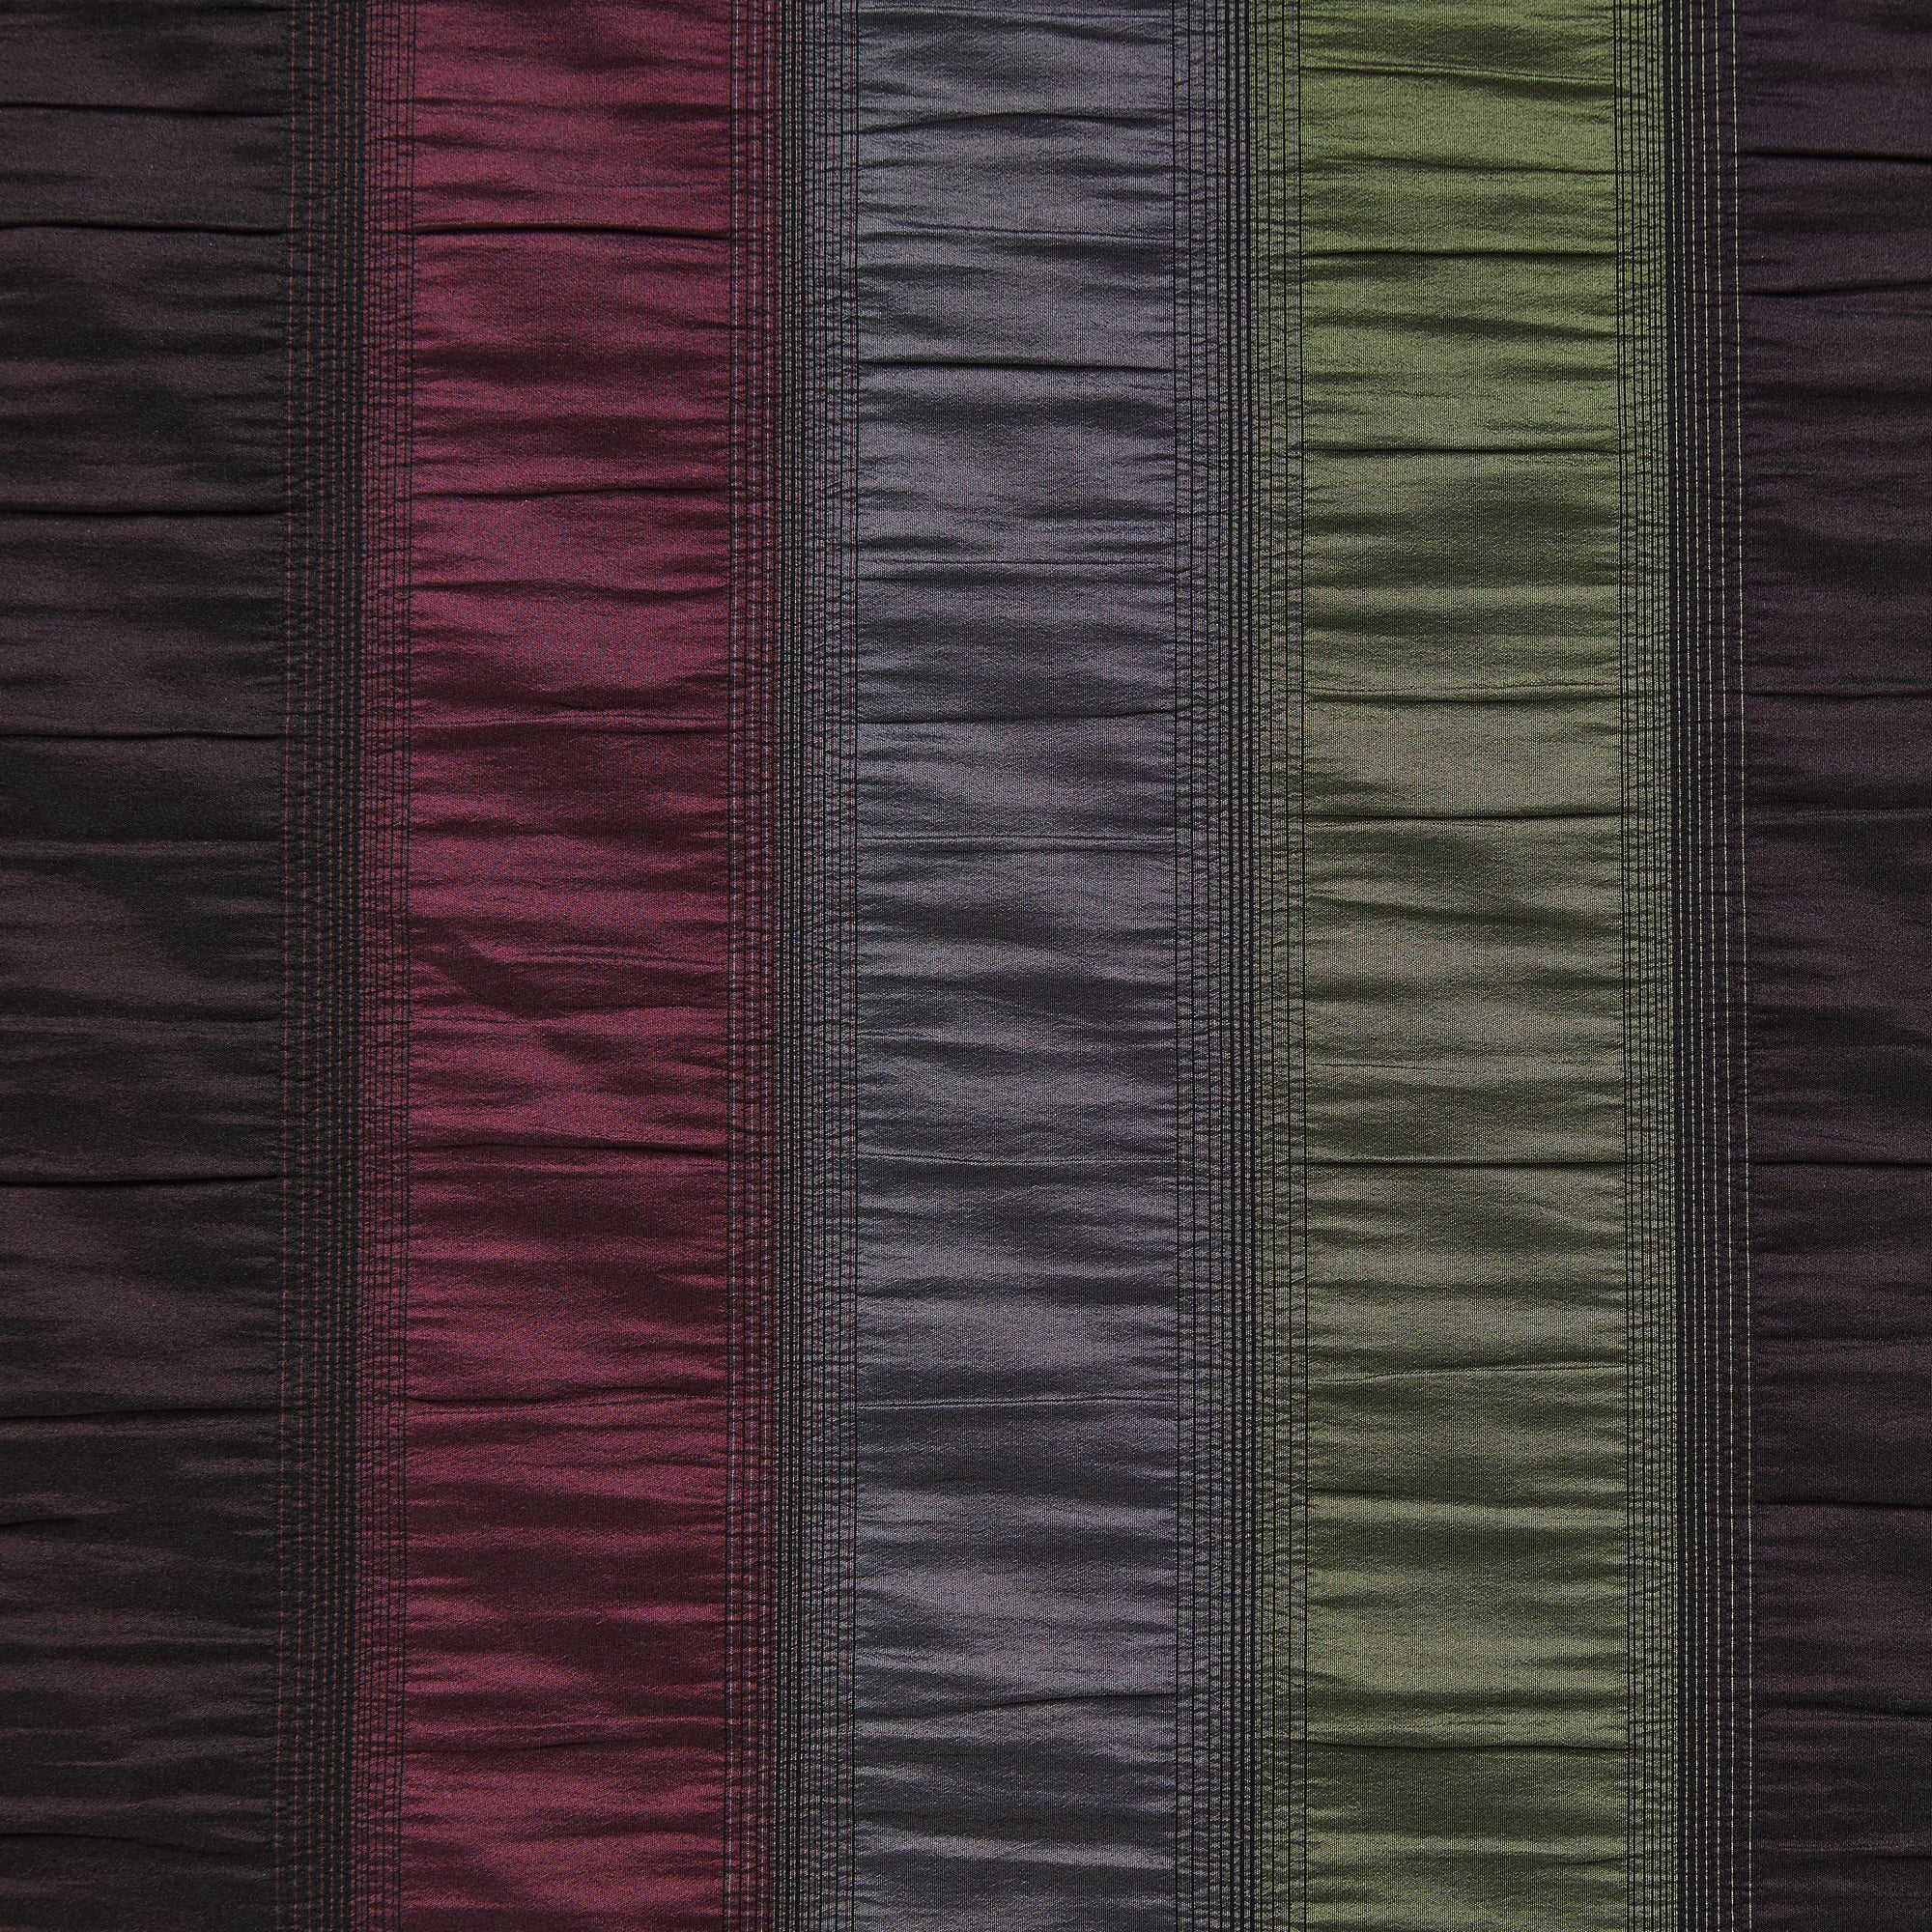 Tatler illustrating the Plum colors version of a striped pure polyester crisp smooth textured taffeta with lustre